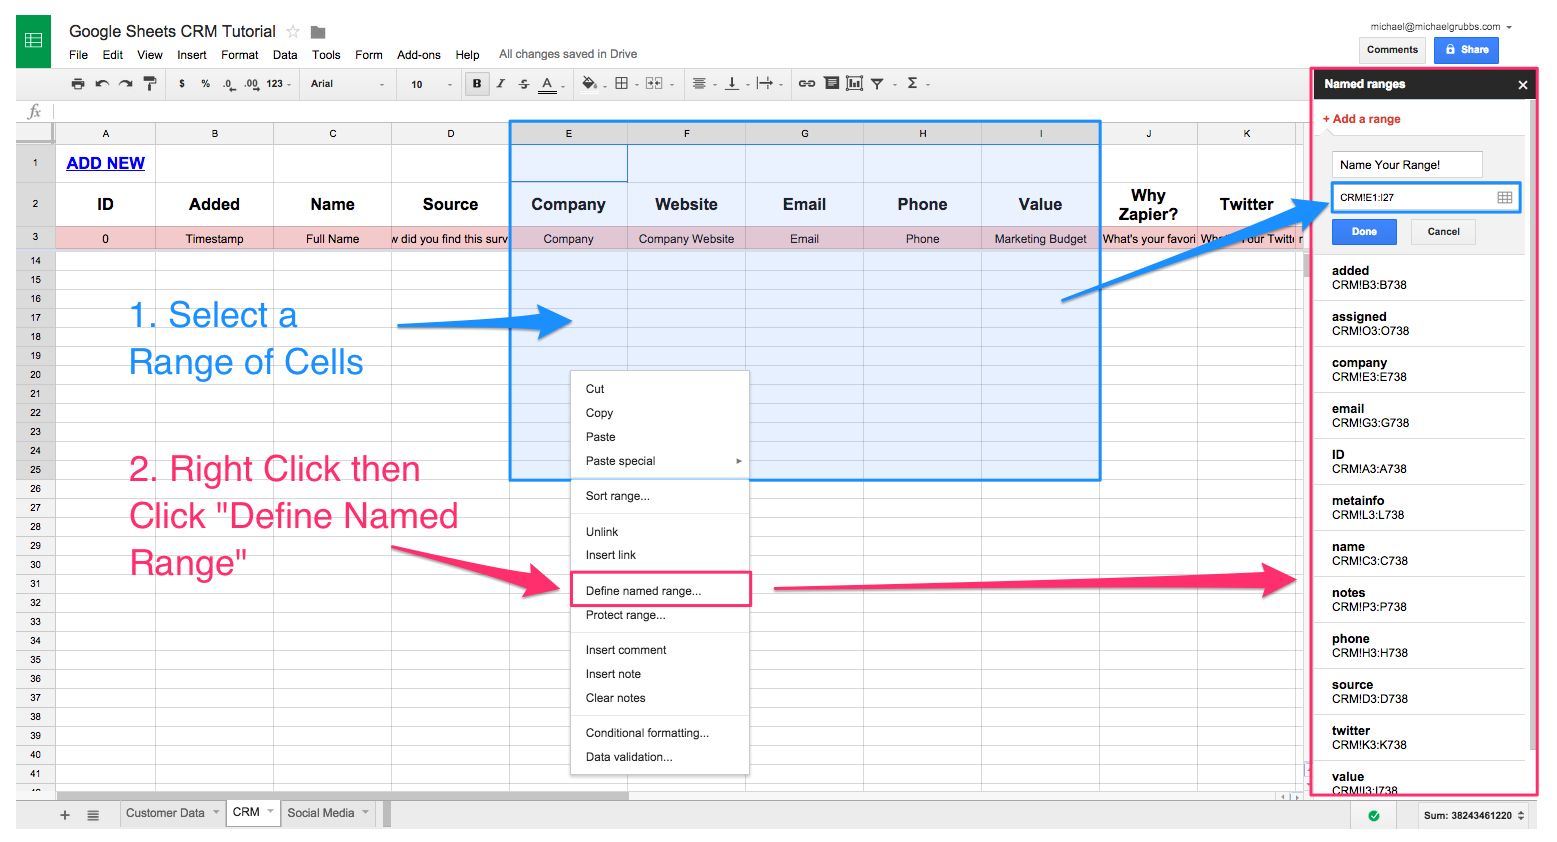 Free Spreadsheet Template inside Spreadsheet Crm: How To Create A Customizable Crm With Google Sheets